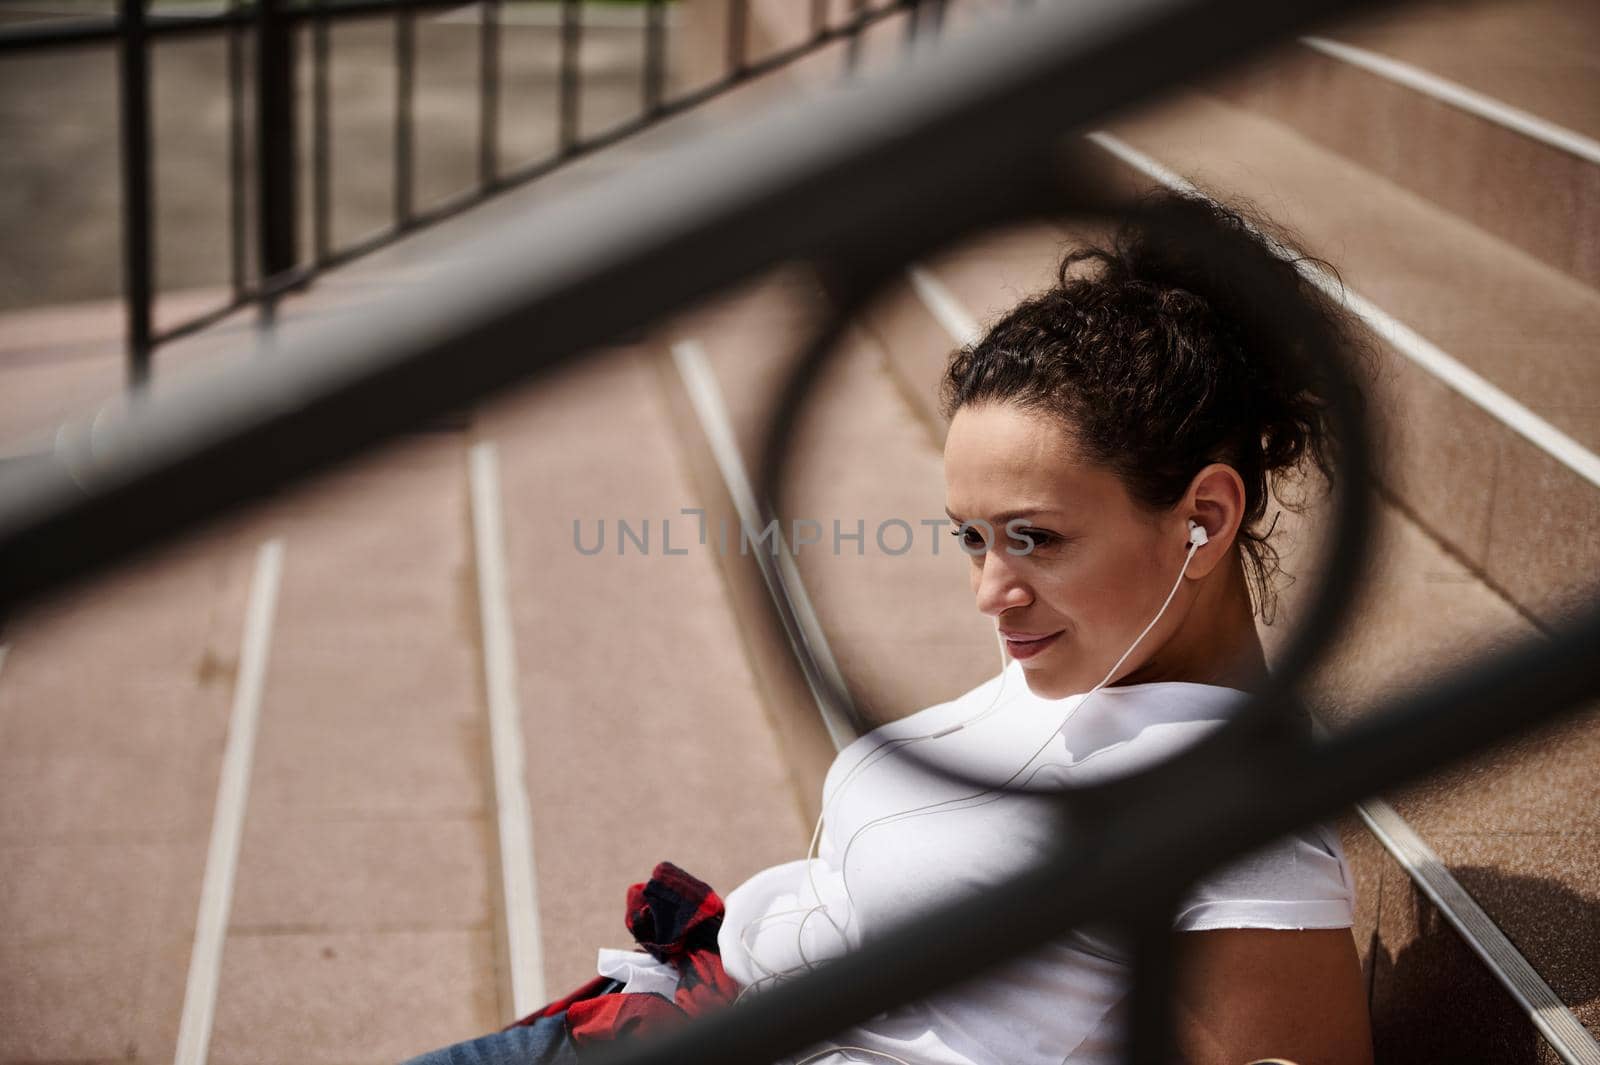 Closeup view through the railing of an attractive Hispanic woman sitting on the steps of an unrecognizable building by artgf